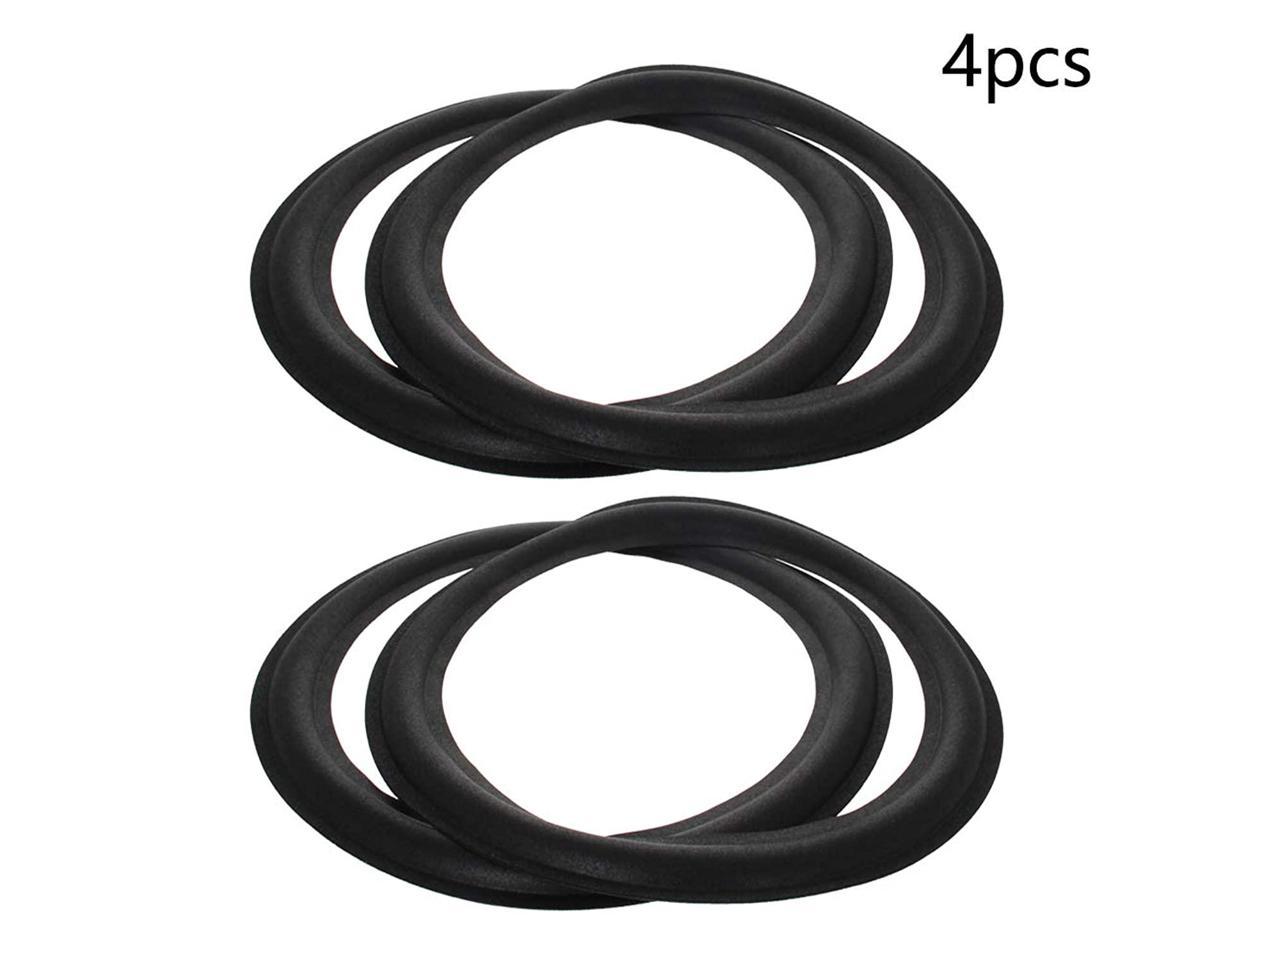 Fielect 4Pcs 4 Inch Speaker Rubber Edge Surround Rings Replacement Parts for Speaker Repair or DIY 